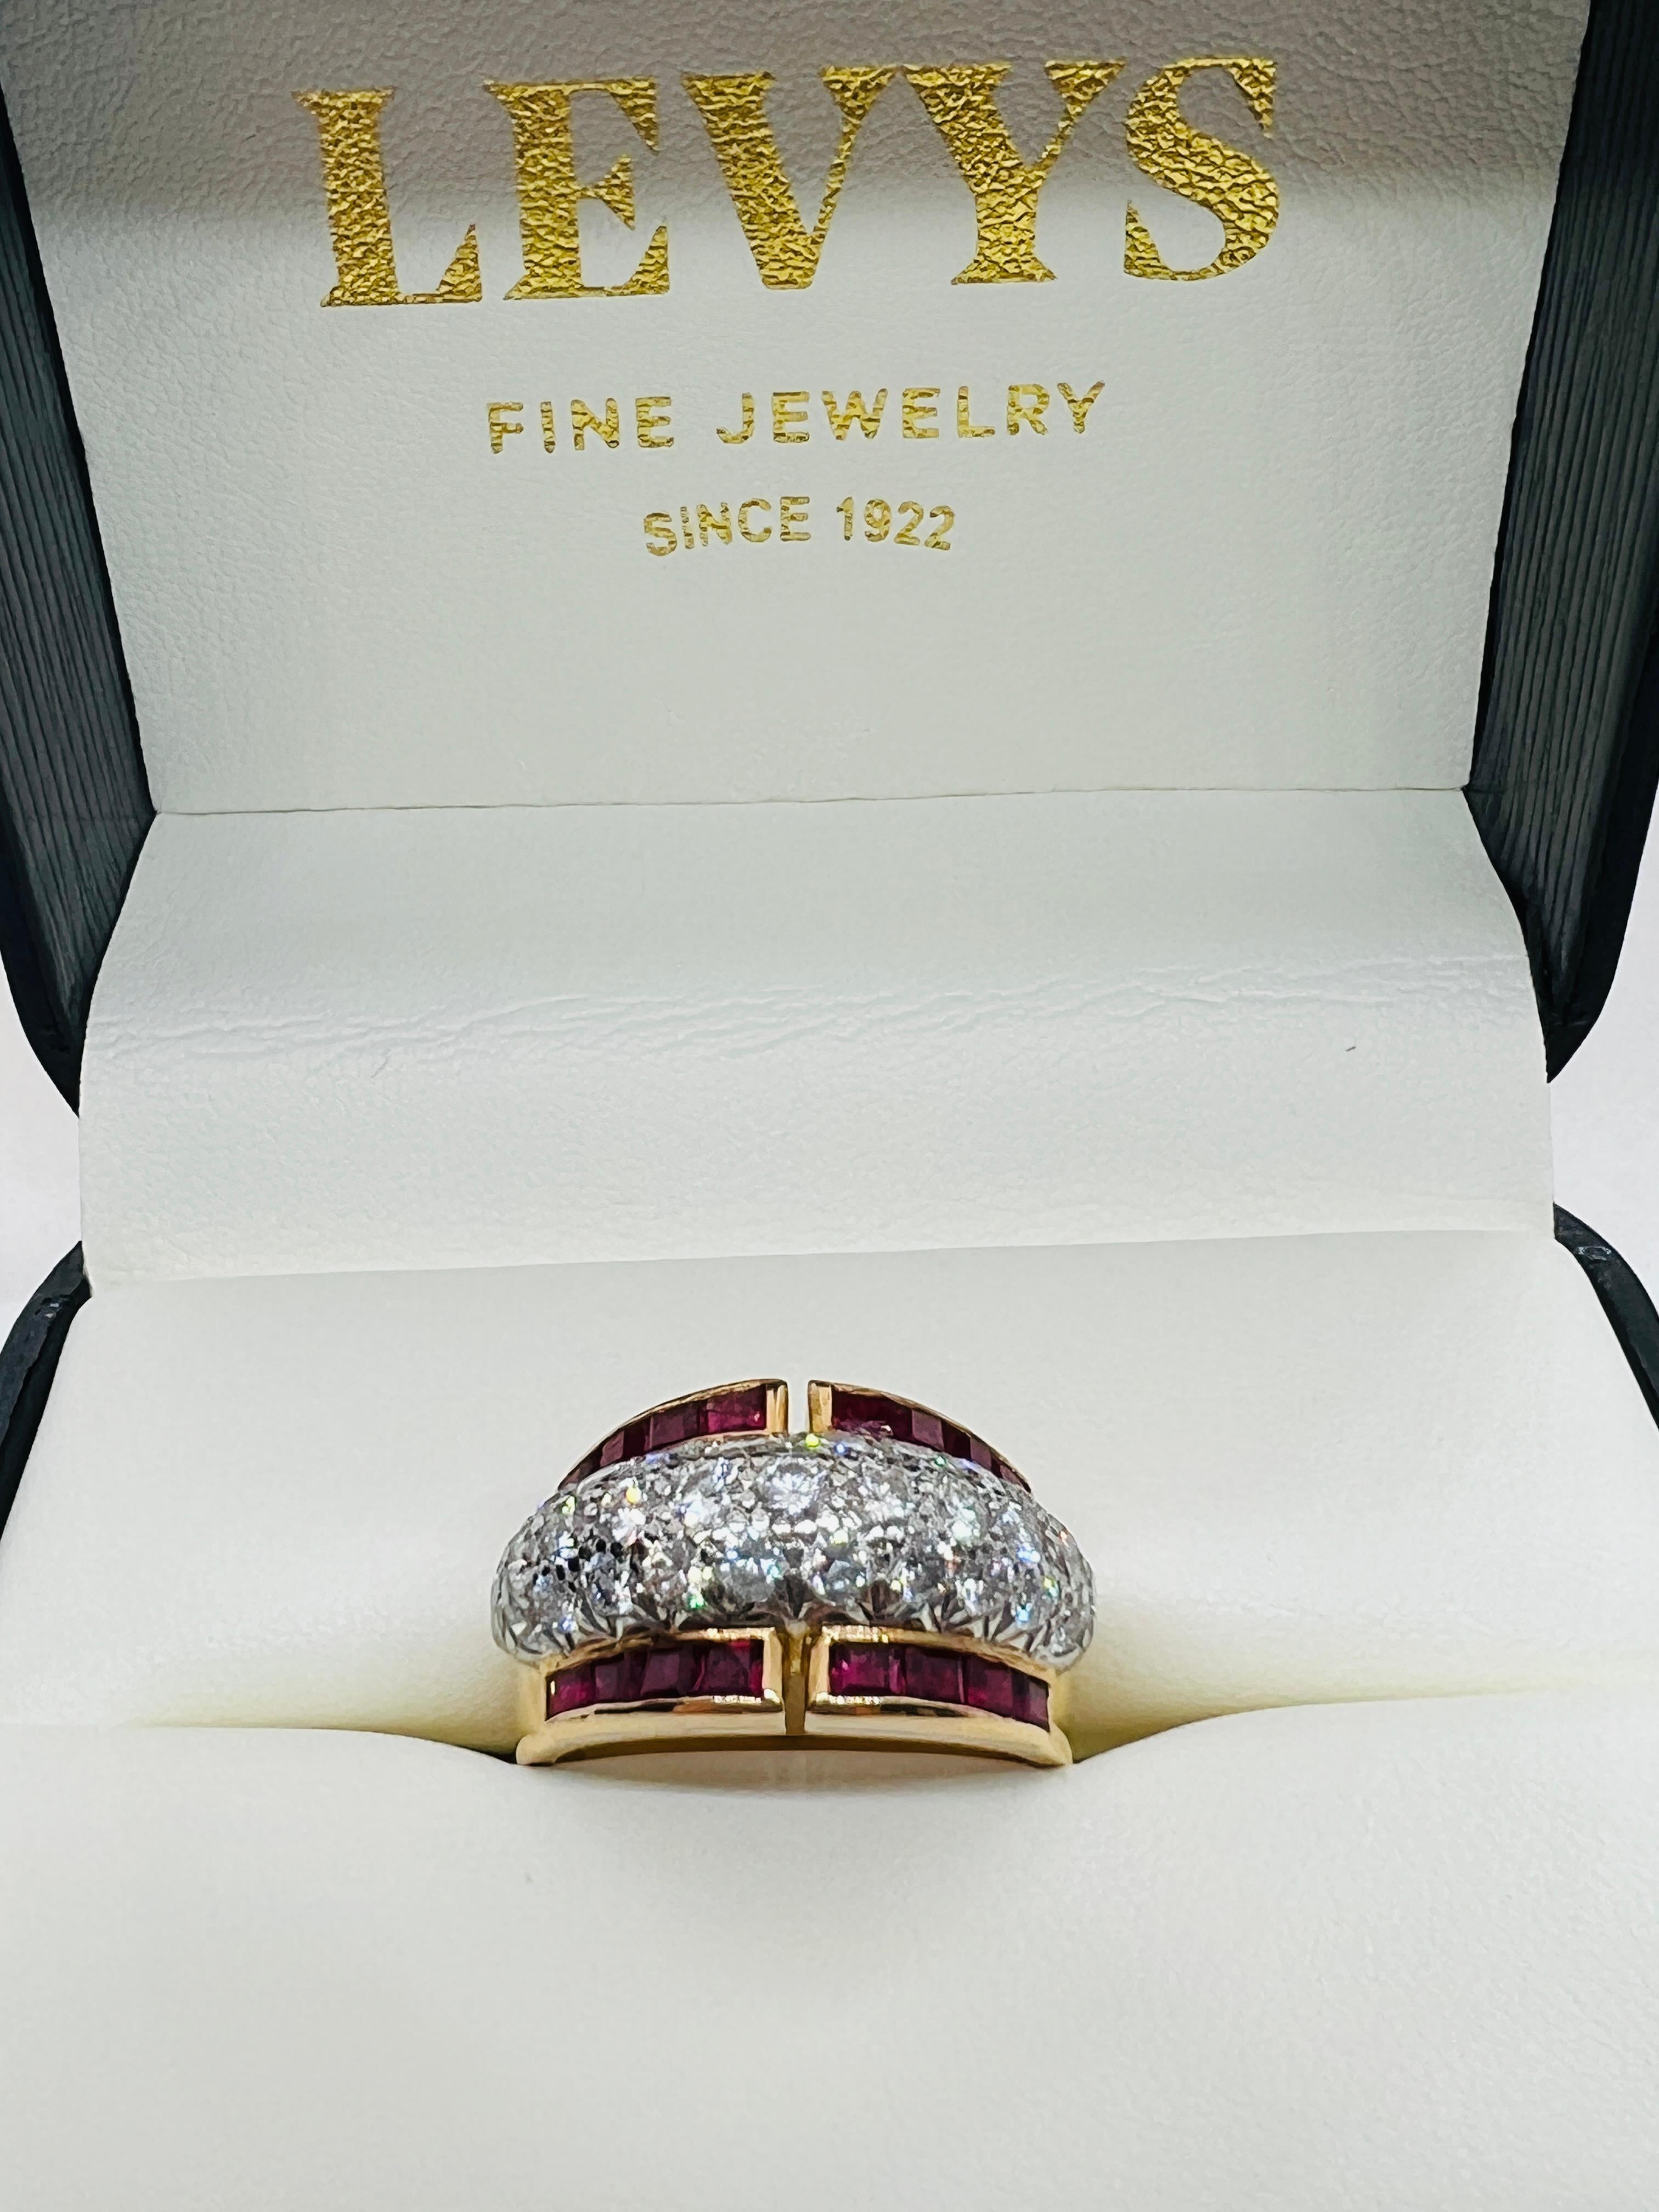 Designer Oscar Heyman Brothers Retro Ring. The ring is made in 18K Yellow gold and has a platinum top that holds three rows of 31 pave set diamonds. The diamonds are flanked by a single row each of calibre cut rubies. The ring is 12.3mm wide at its